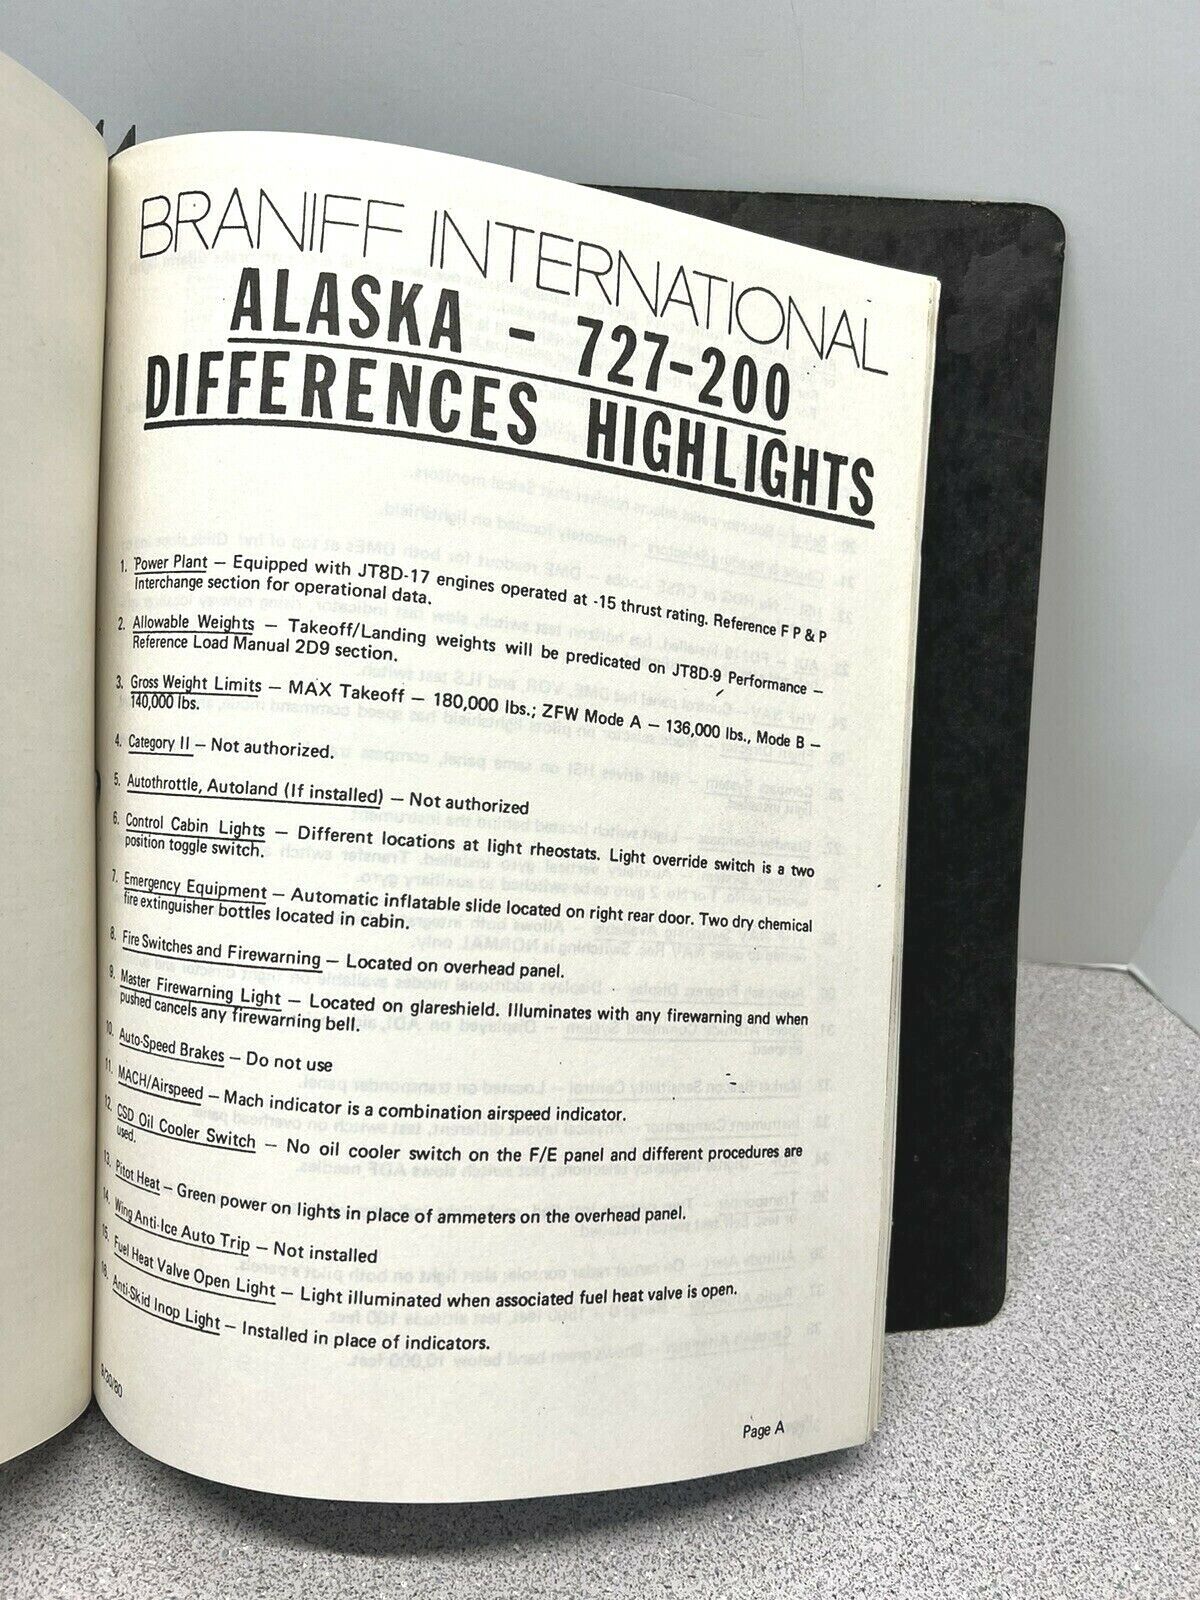 Braniff 727 Operations Manual-Alaska 727-200 Differences Record of Revision(E14)